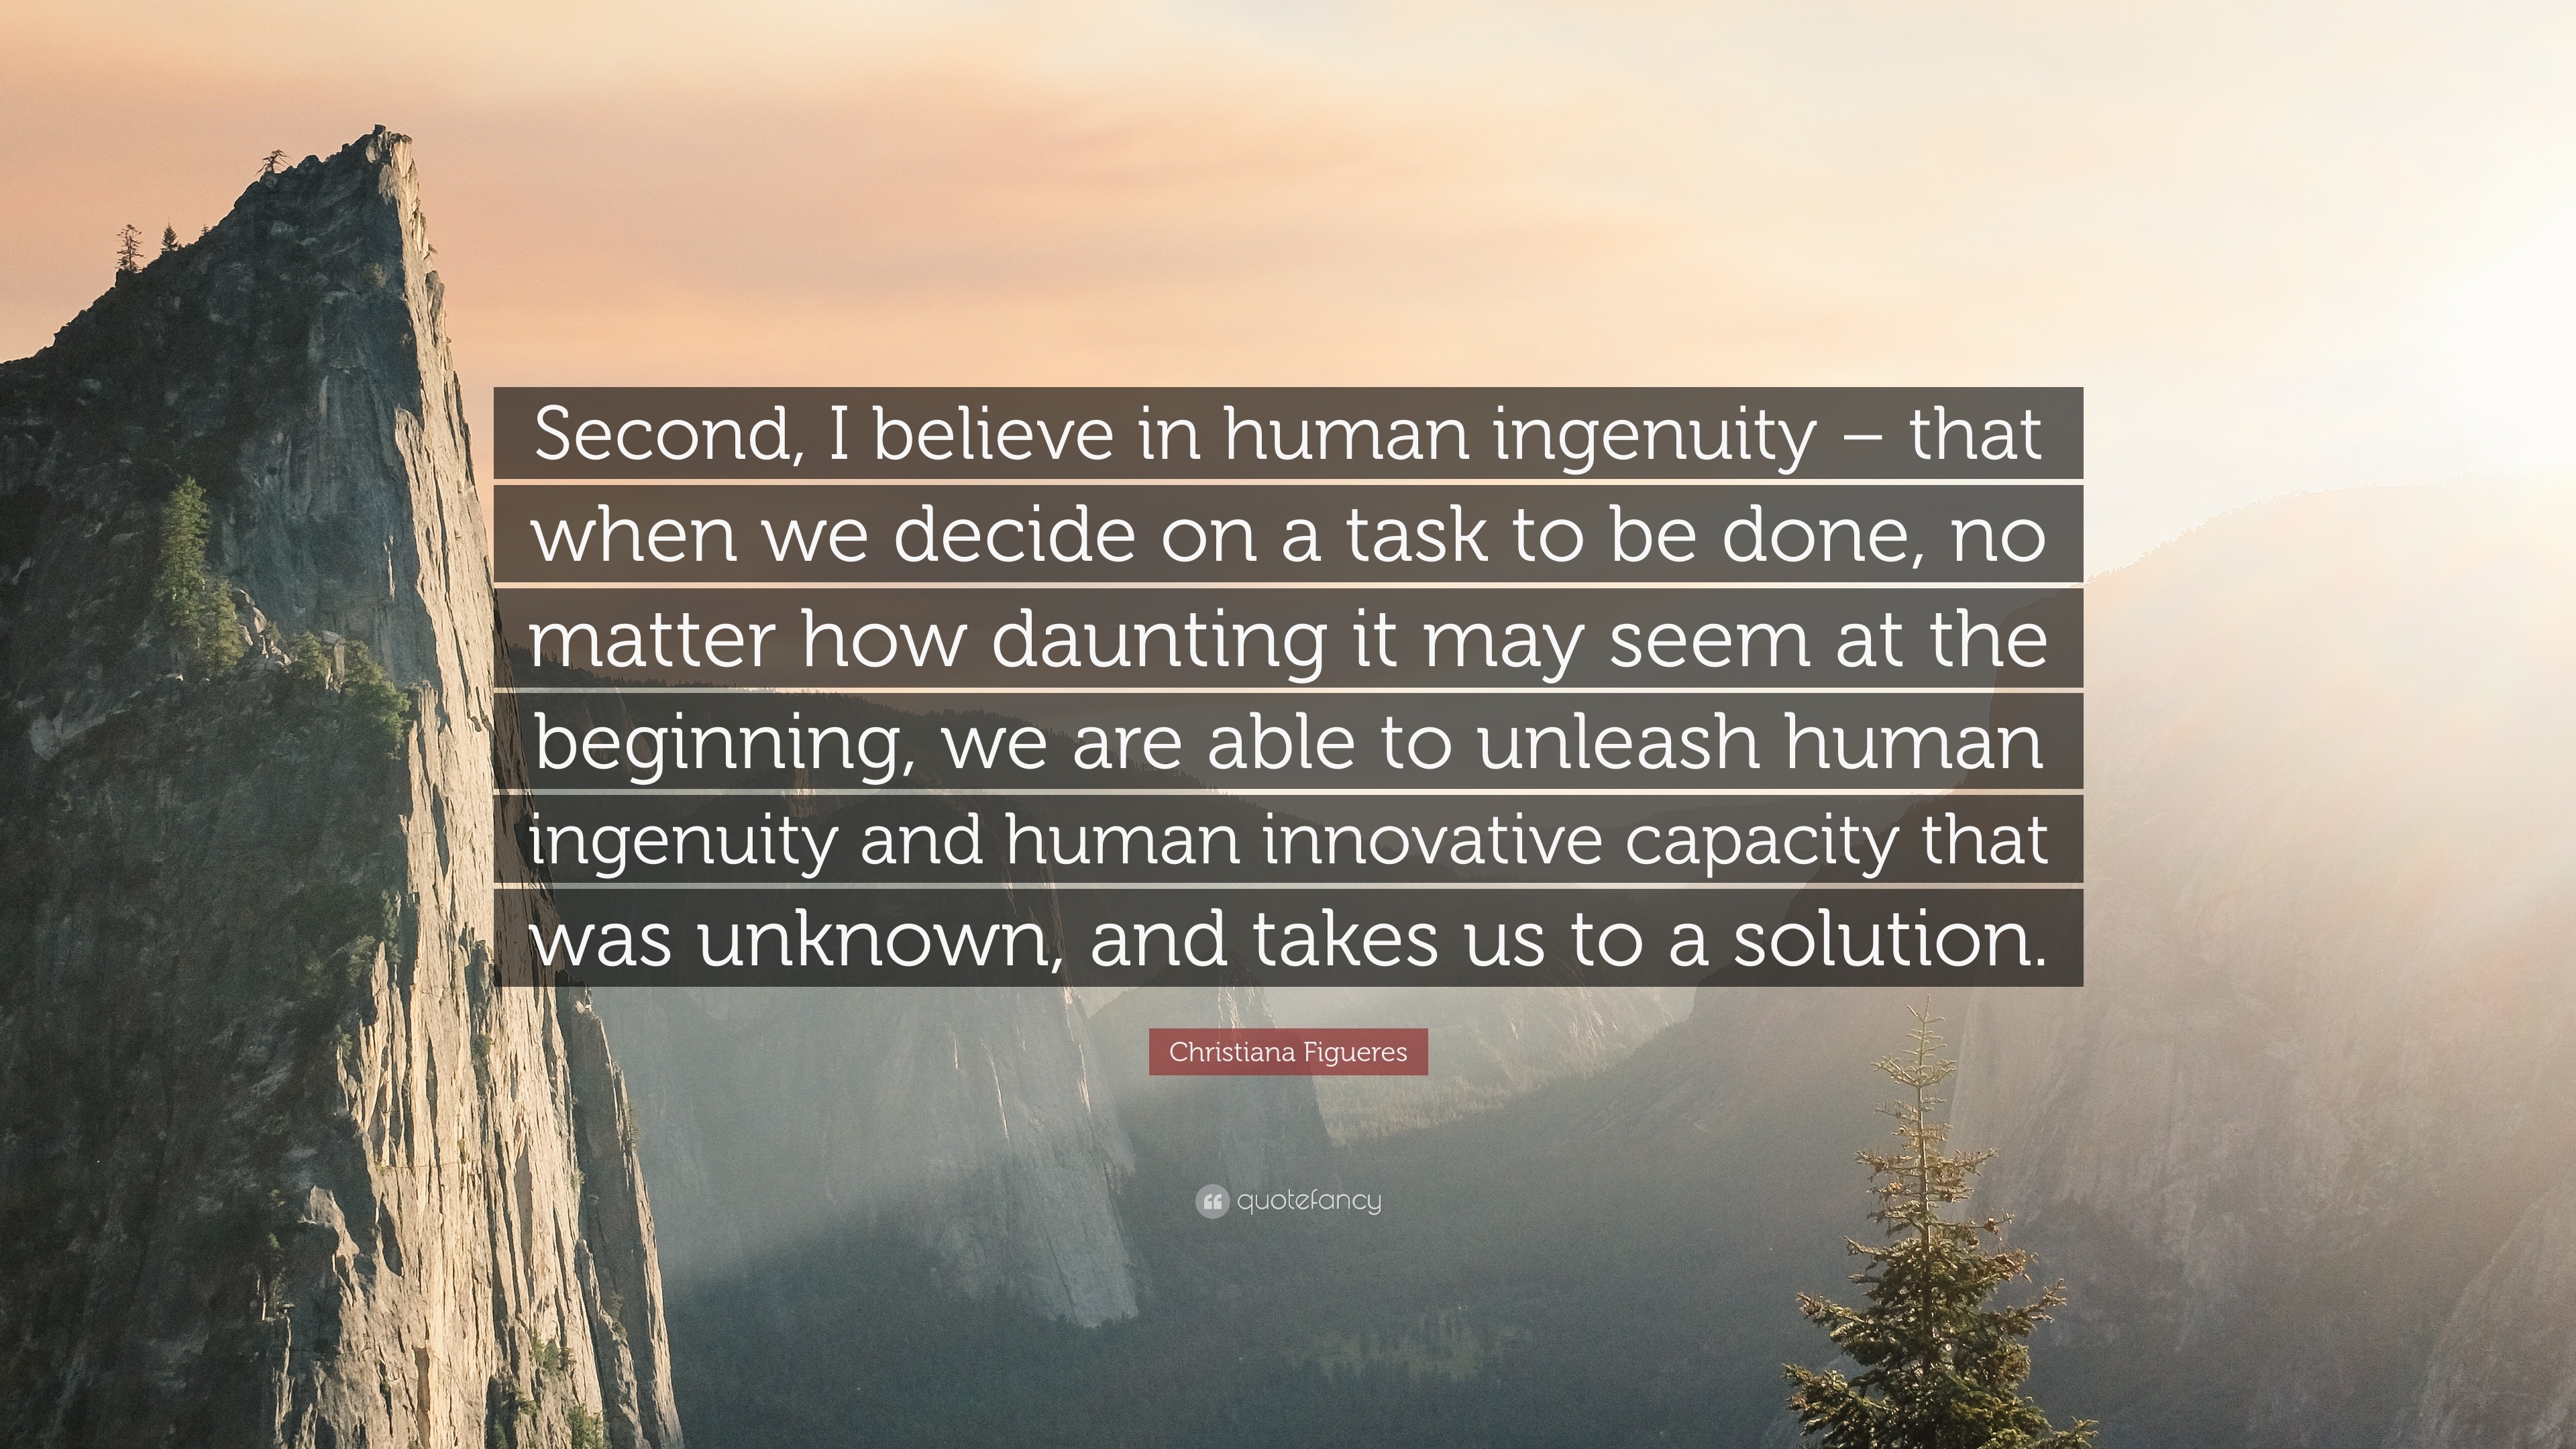 Christiana Figueres Quote: "Second, I believe in human ...